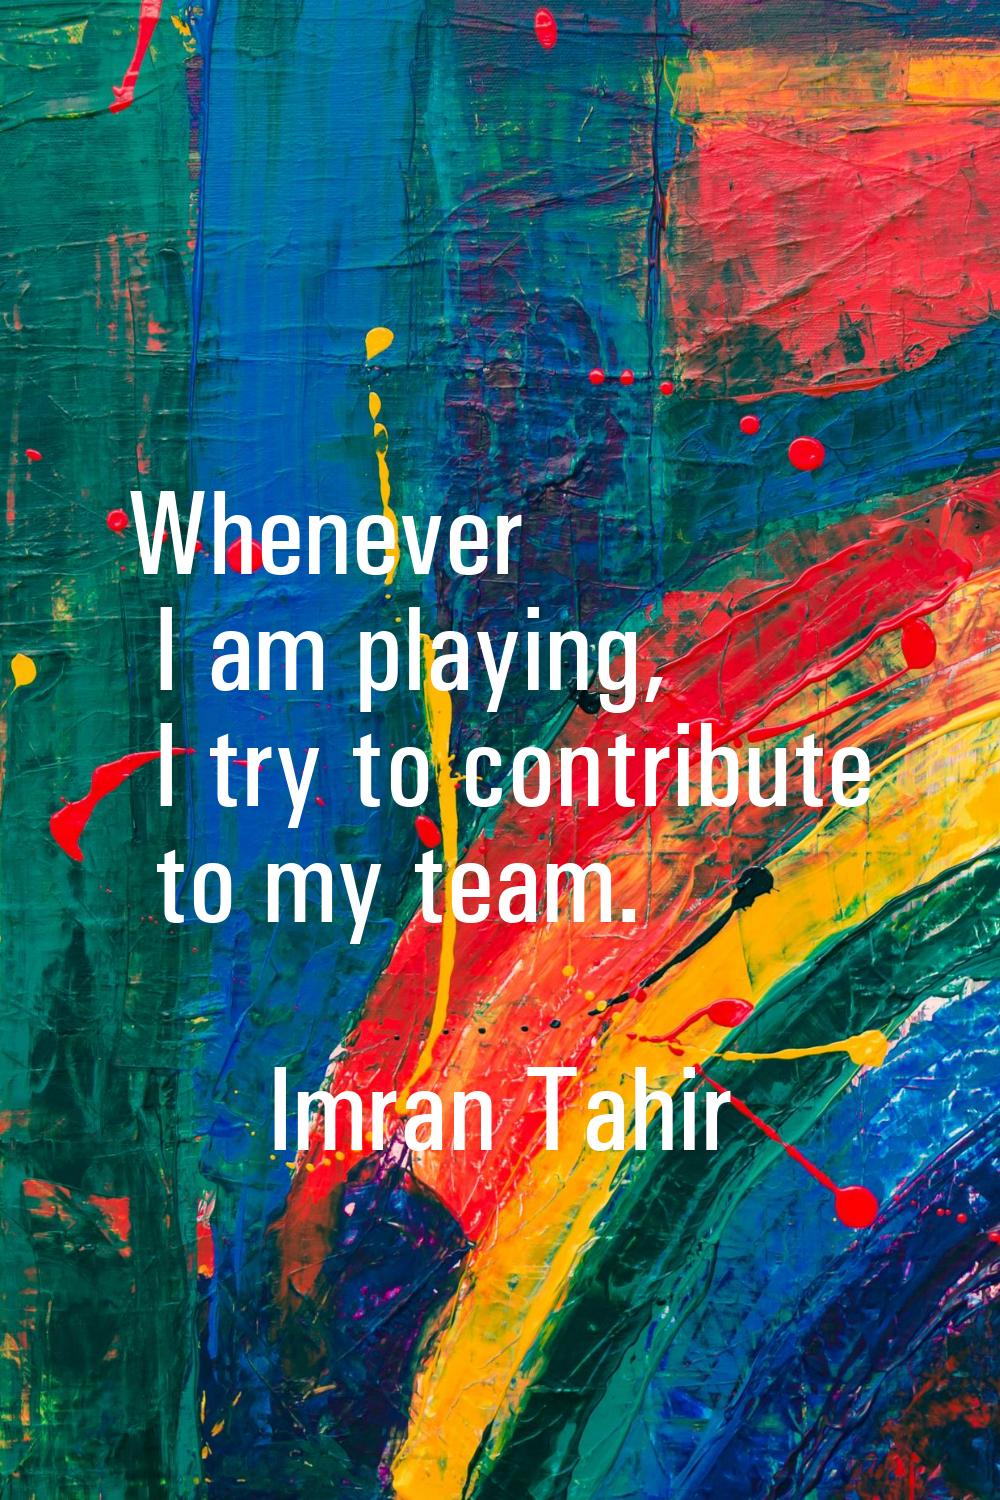 Whenever I am playing, I try to contribute to my team.